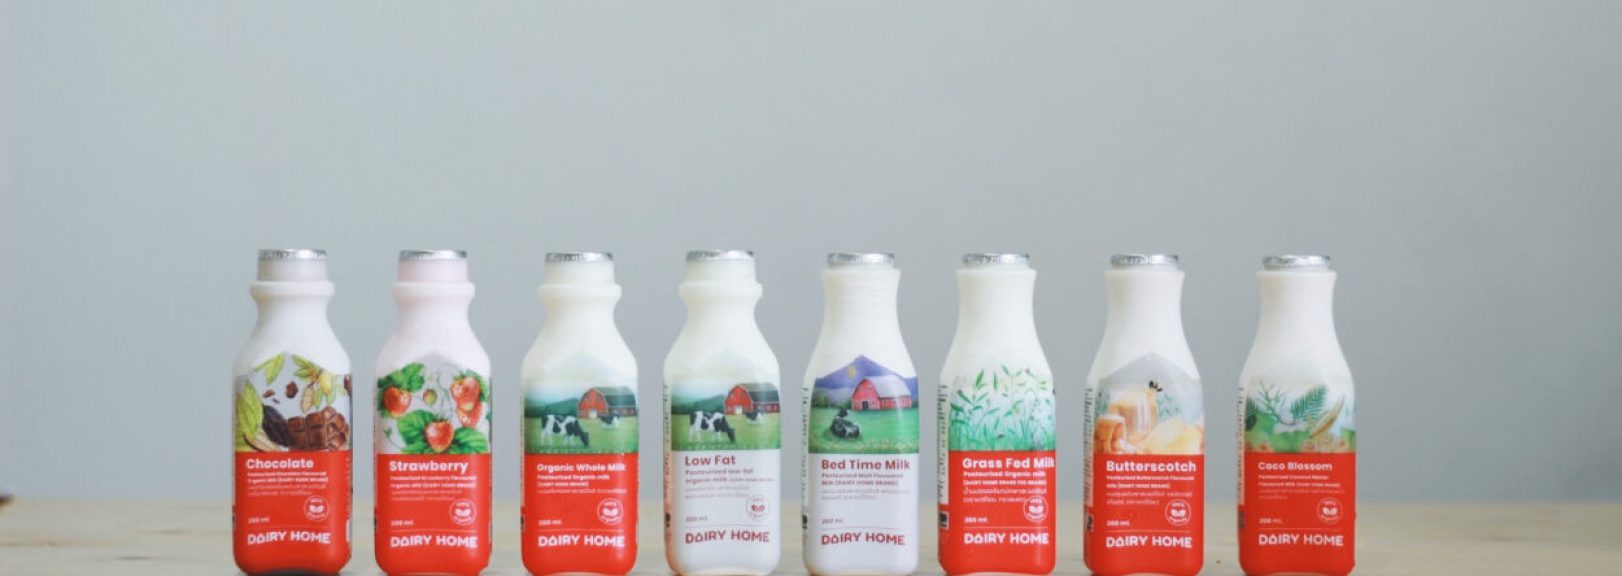 cropped-dairy-home-banner.jpg